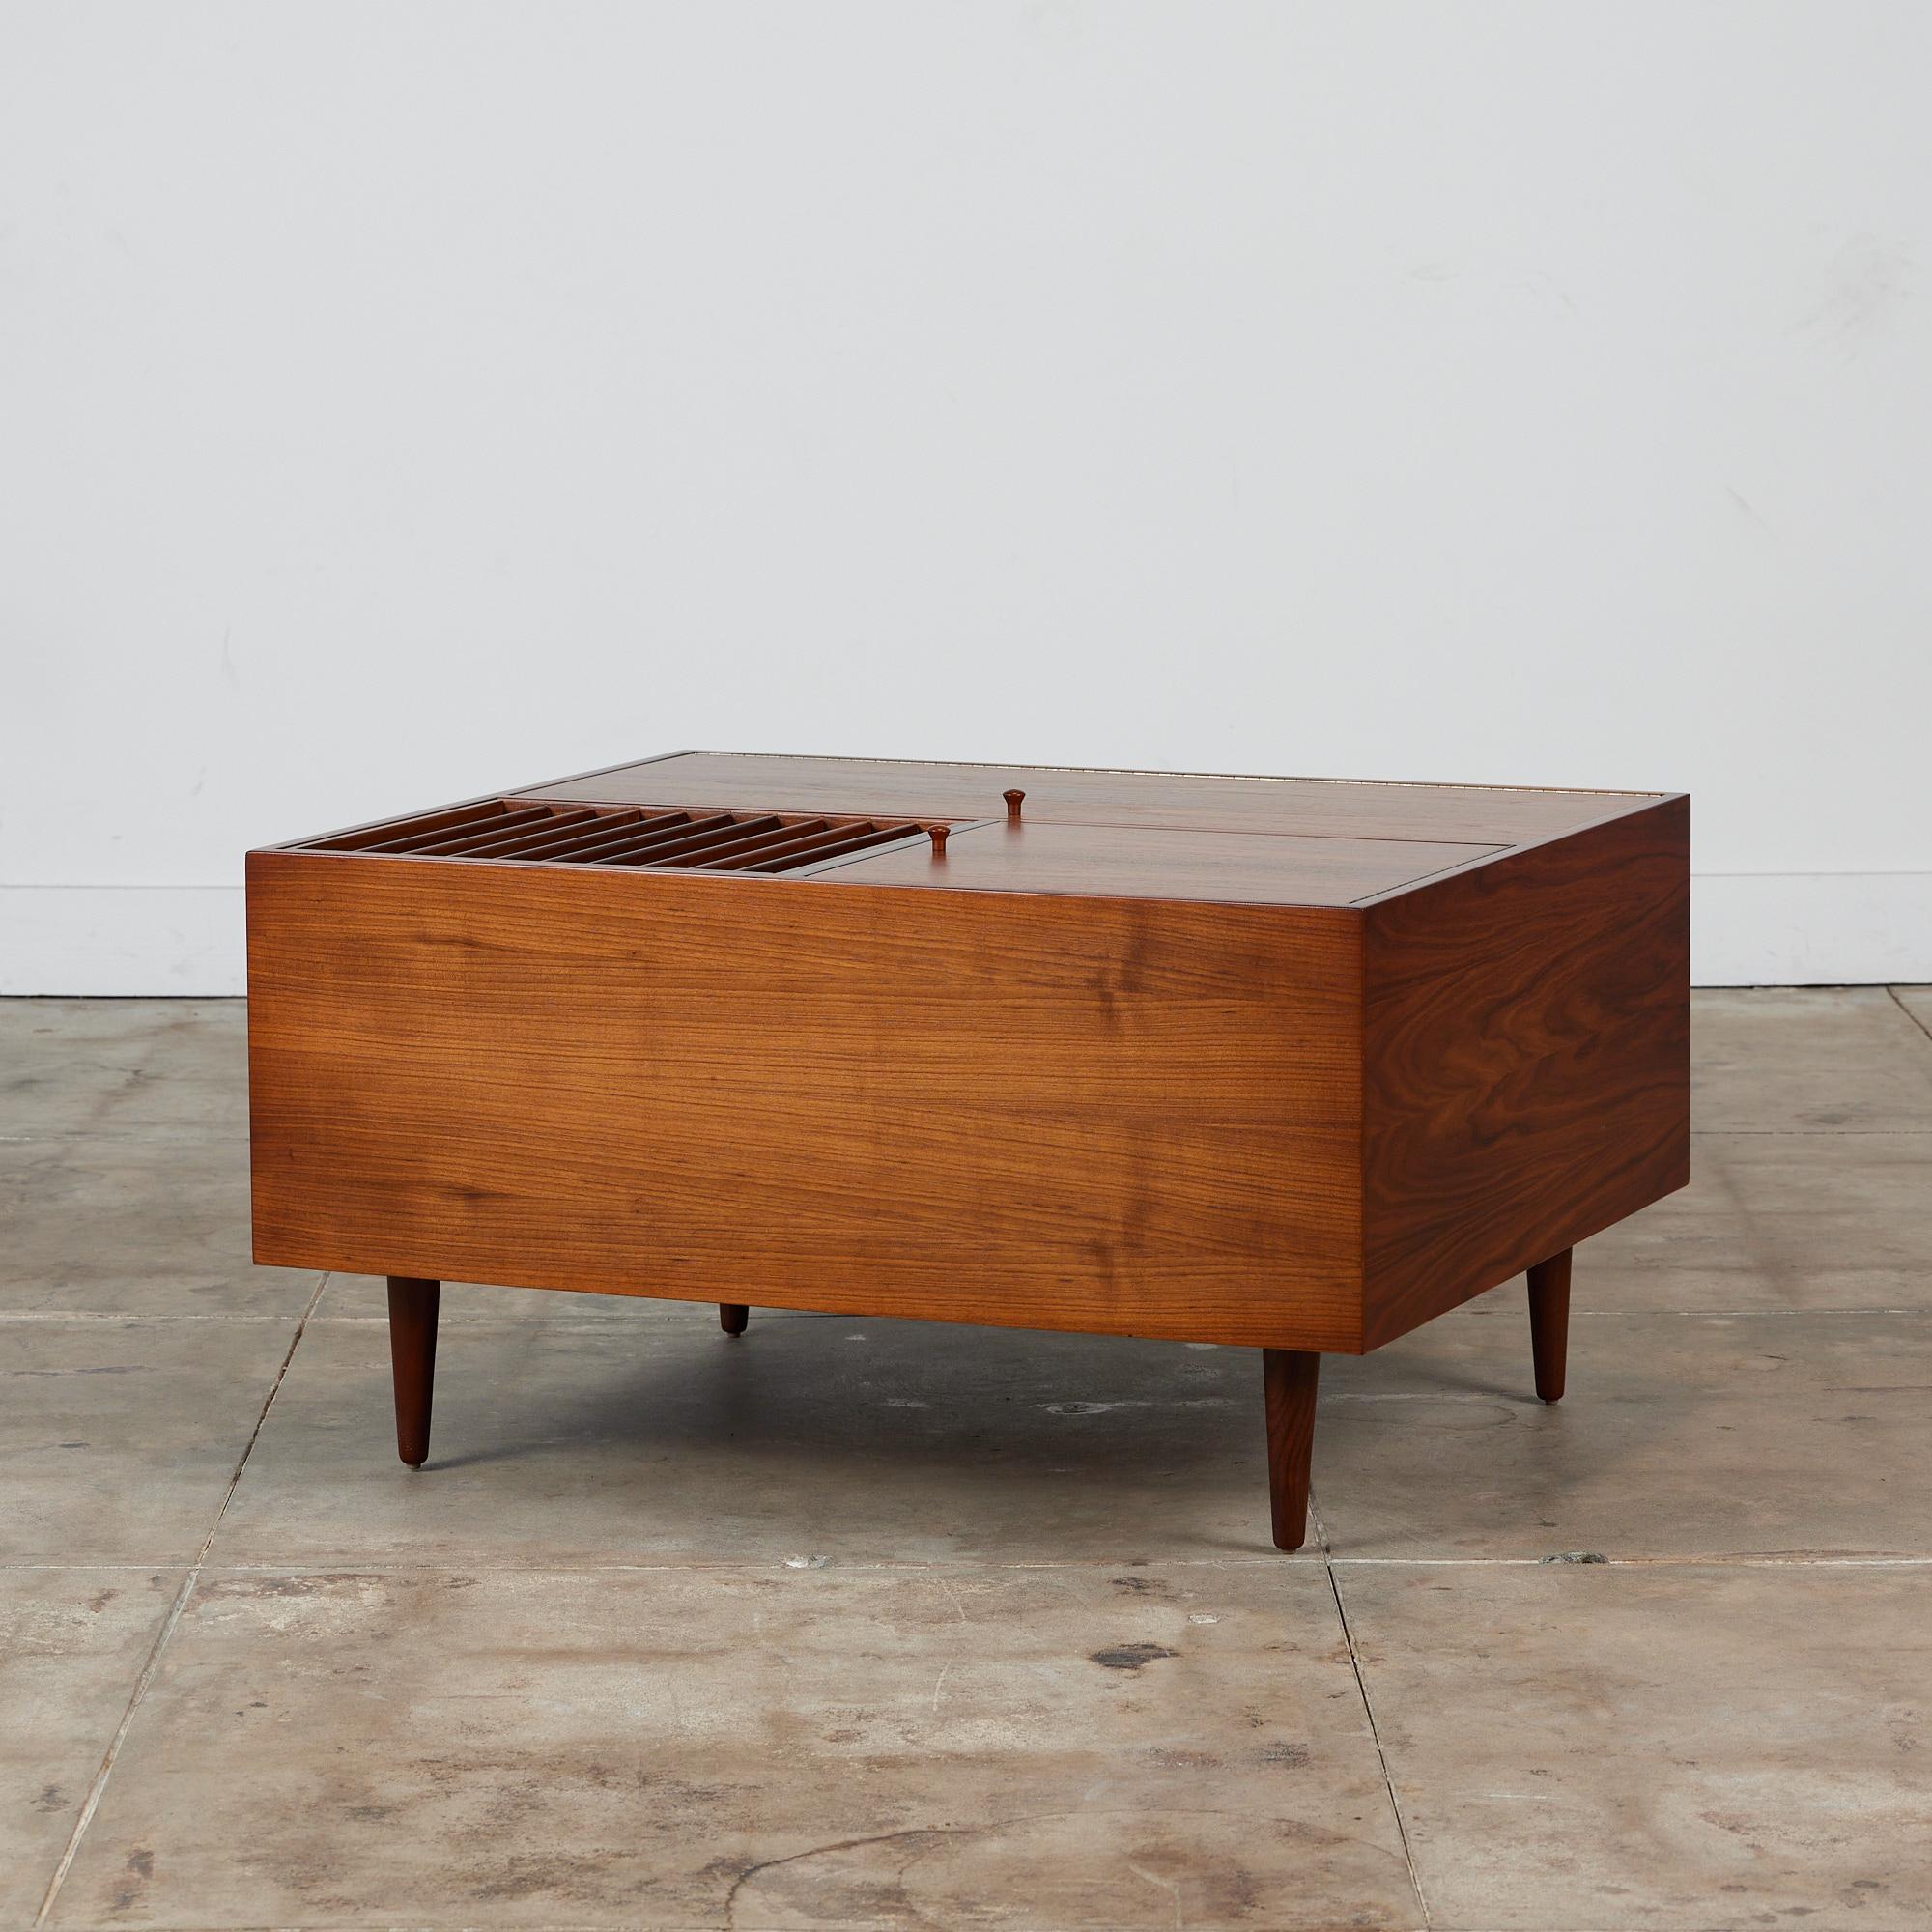 Large walnut coffee table by Milo Baughman for Glenn of California c.1950s, USA. This unique table features ample storage with two deep hinged cabinet doors. The cabinets open to reveal one large storage cabinet and a divided storage cabinet. A